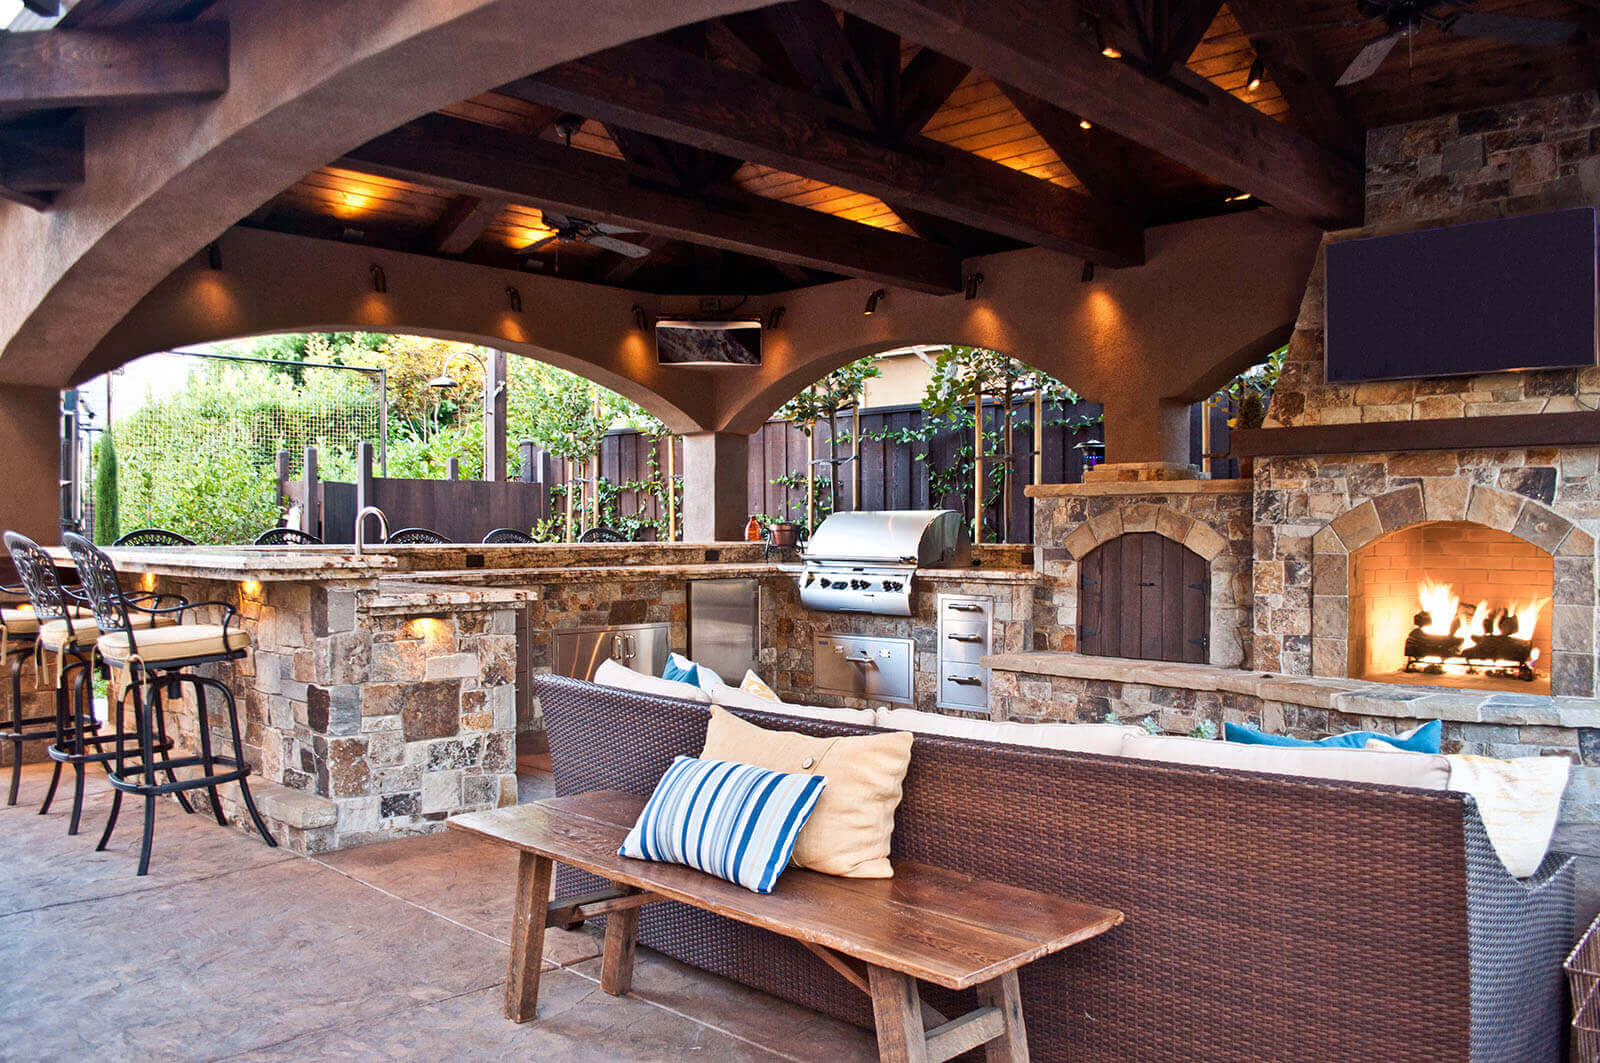 large wrapped stone counter bbq and cooking area connected to a stone mantle fireplace and wood storage area, open bar seating on kitchen counter, and outdoor rattan couch in front of the fireplace. The whole building is covered with accent lit curved archway roofing made from stone and dark wood